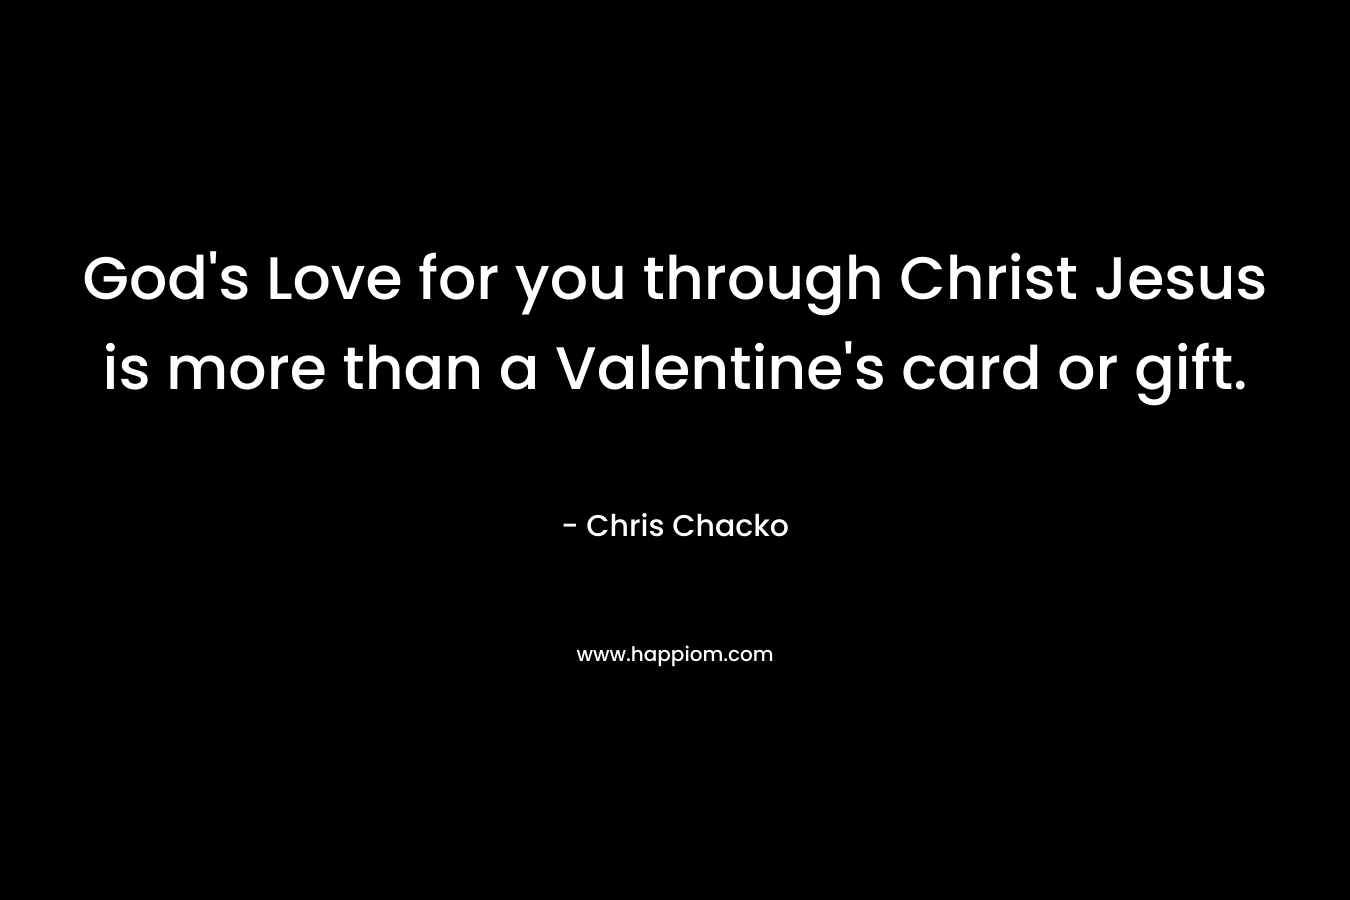 God’s Love for you through Christ Jesus is more than a Valentine’s card or gift. – Chris Chacko